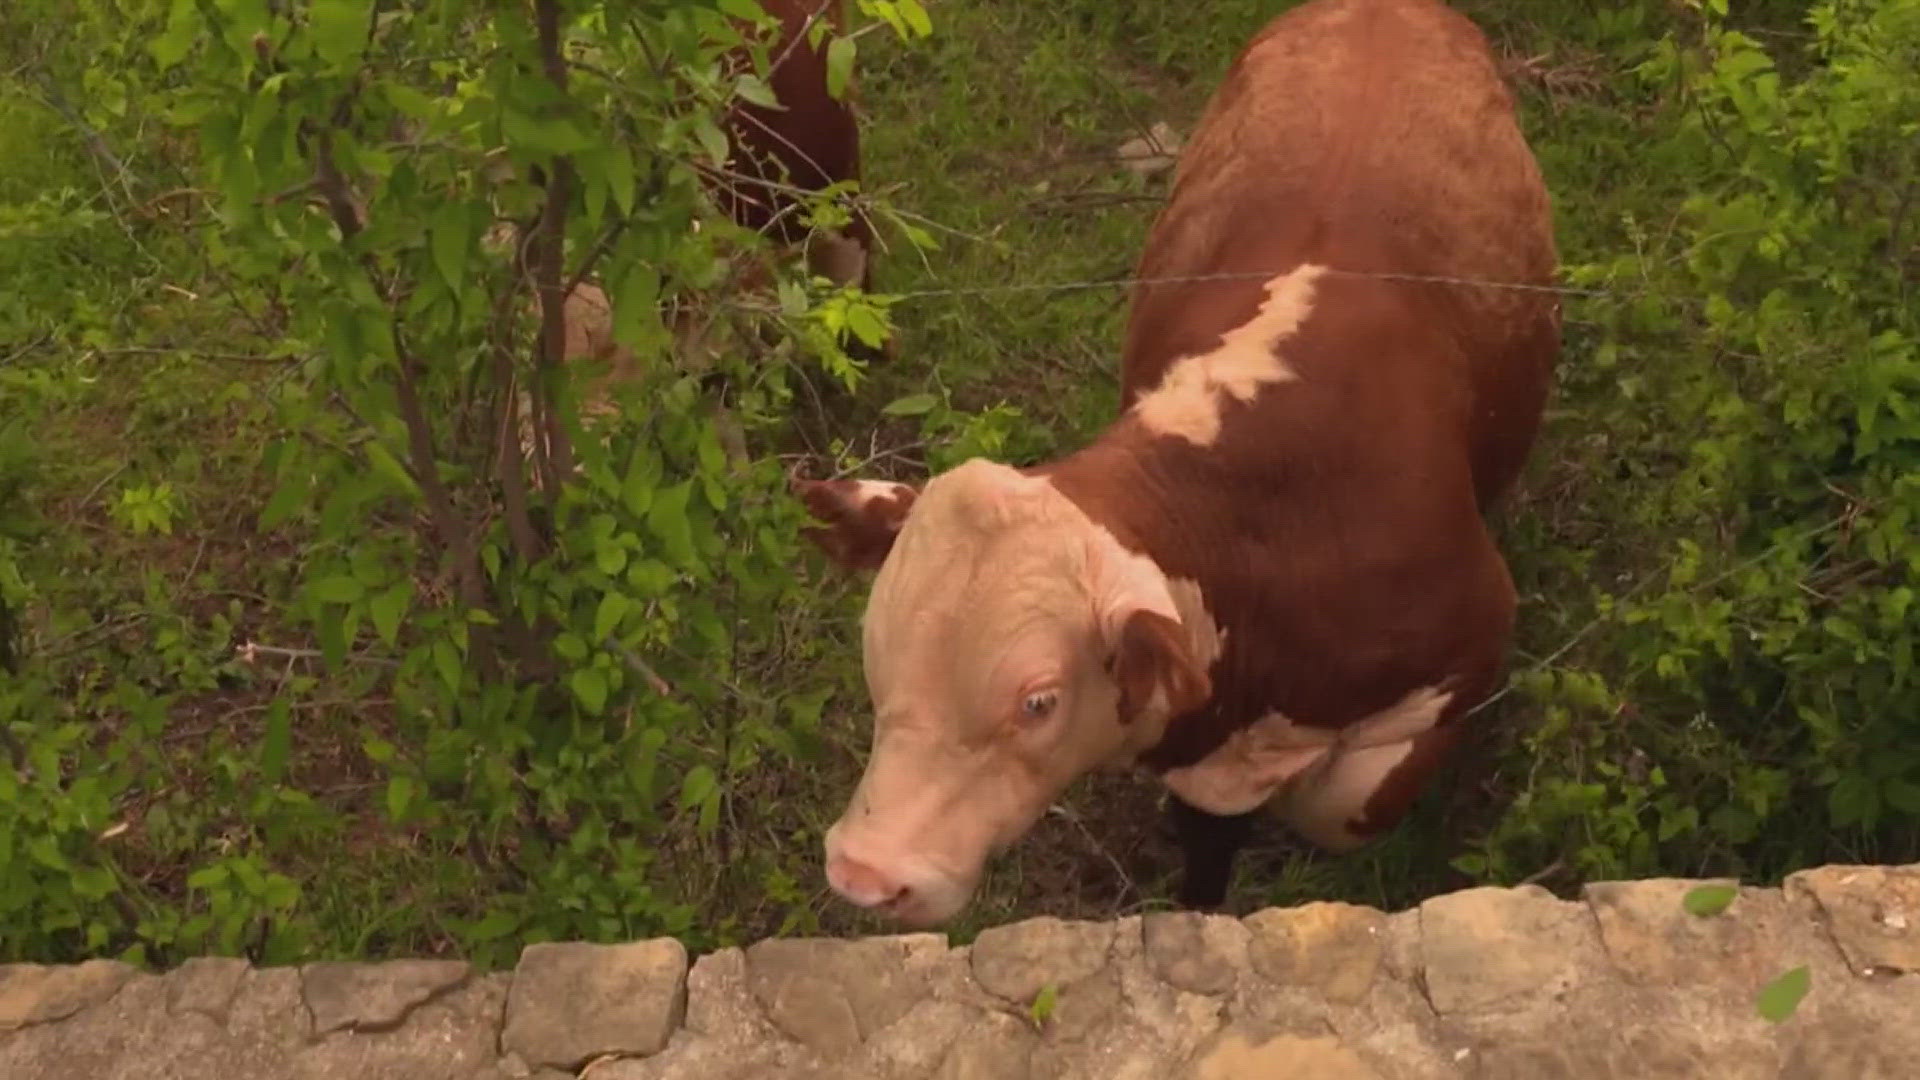 One night a Texas homeowner was startled awake when one of the young bulls she had been giving bananas to came up to her house.